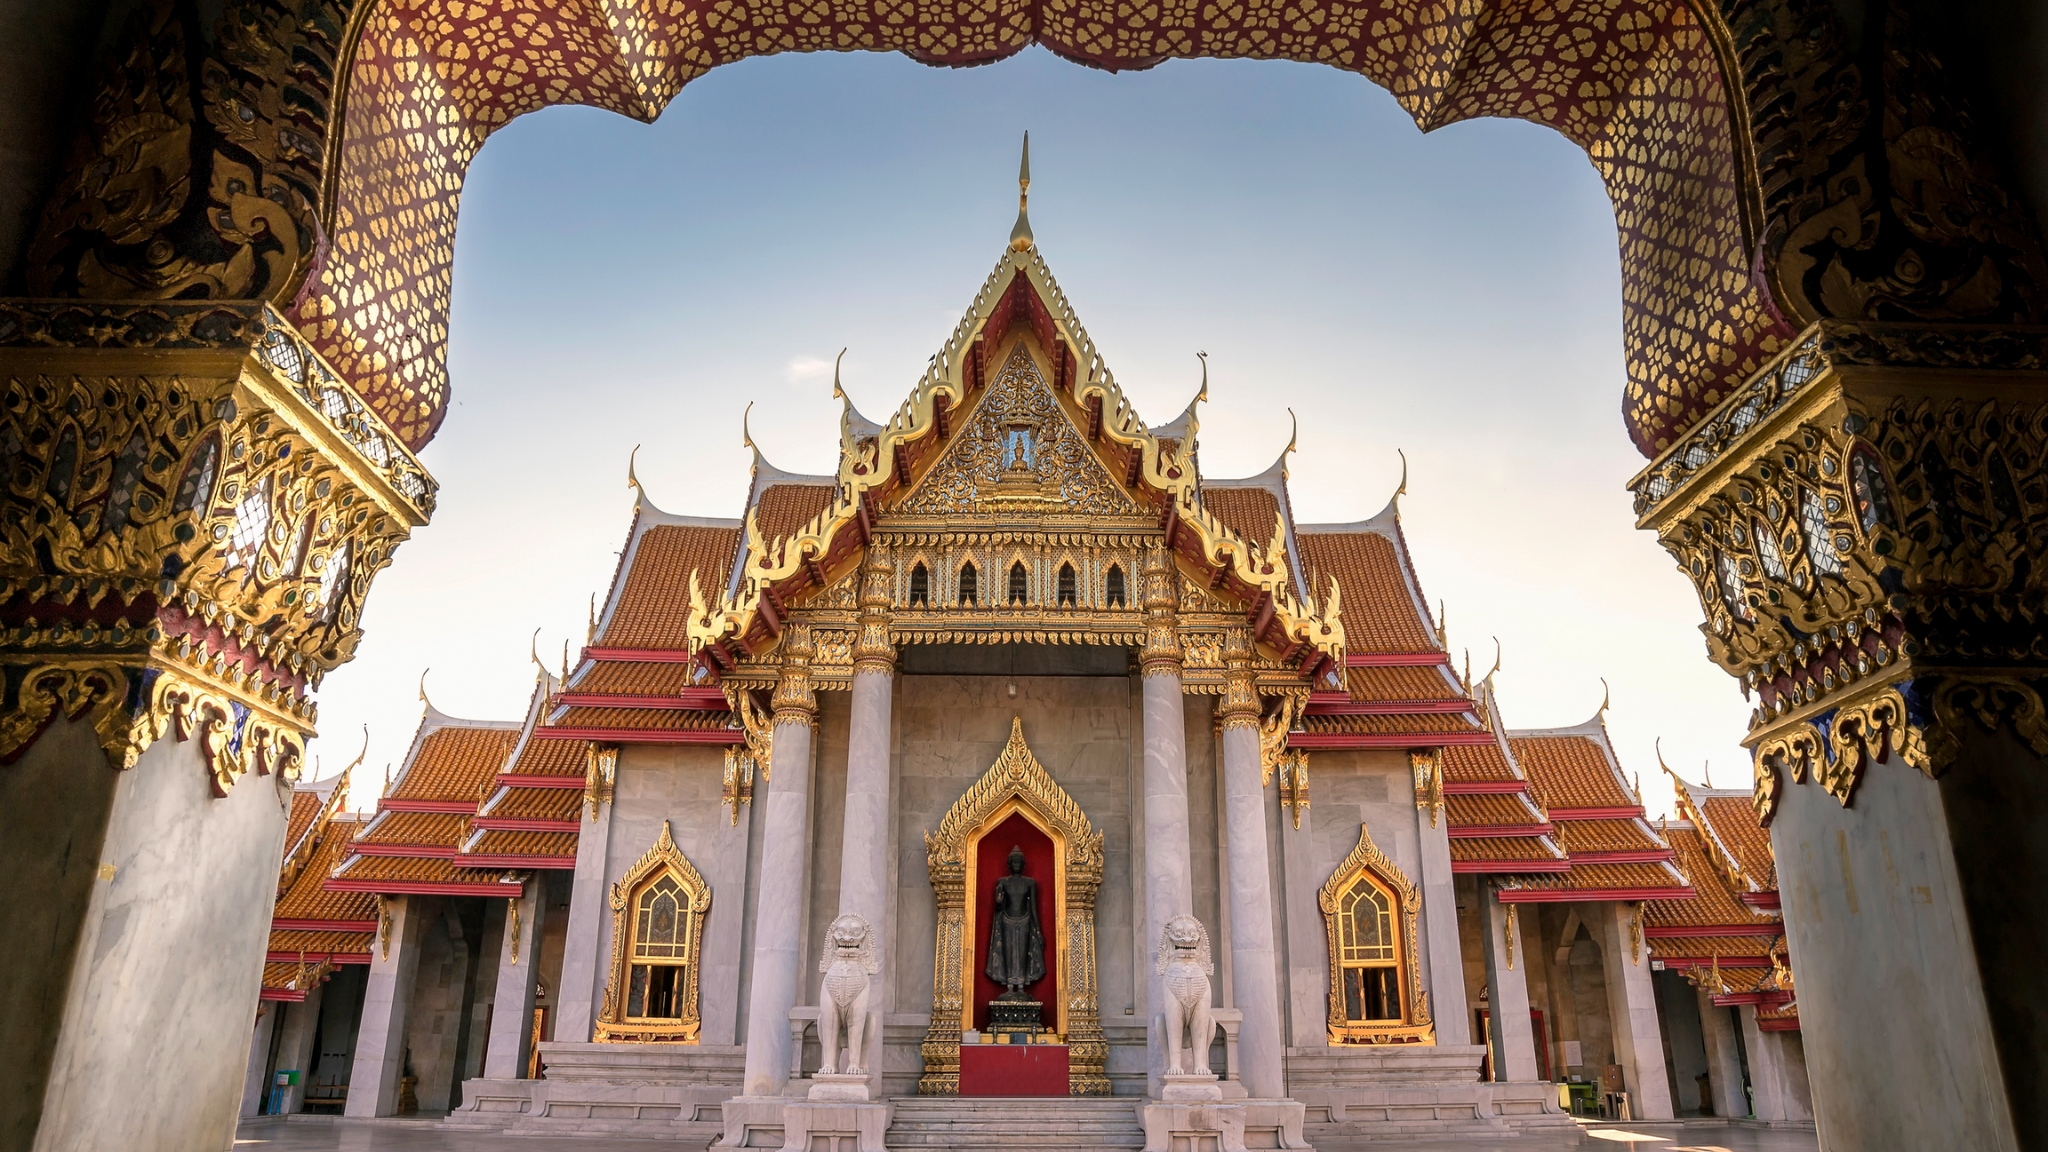 Admire The Intricate Marble Design In Wat Benchamabopit